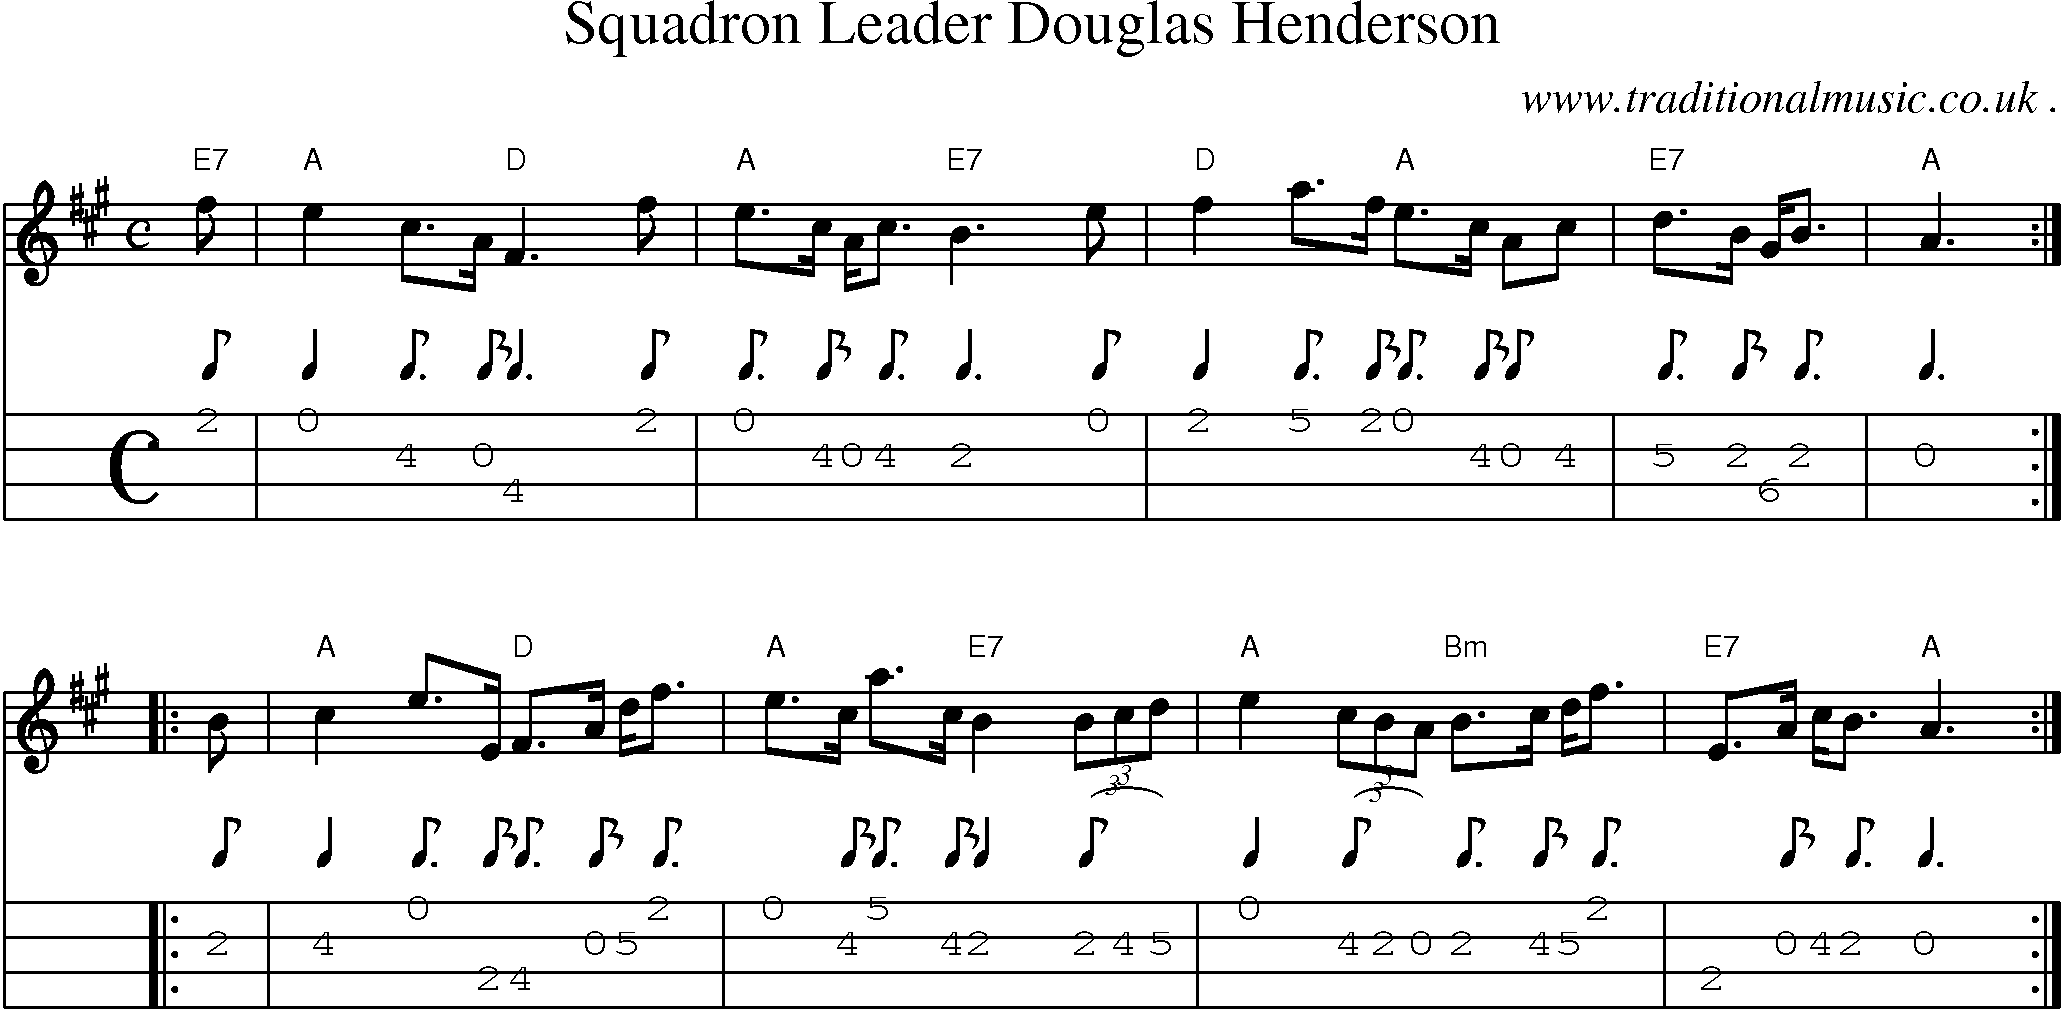 Sheet-music  score, Chords and Mandolin Tabs for Squadron Leader Douglas Henderson